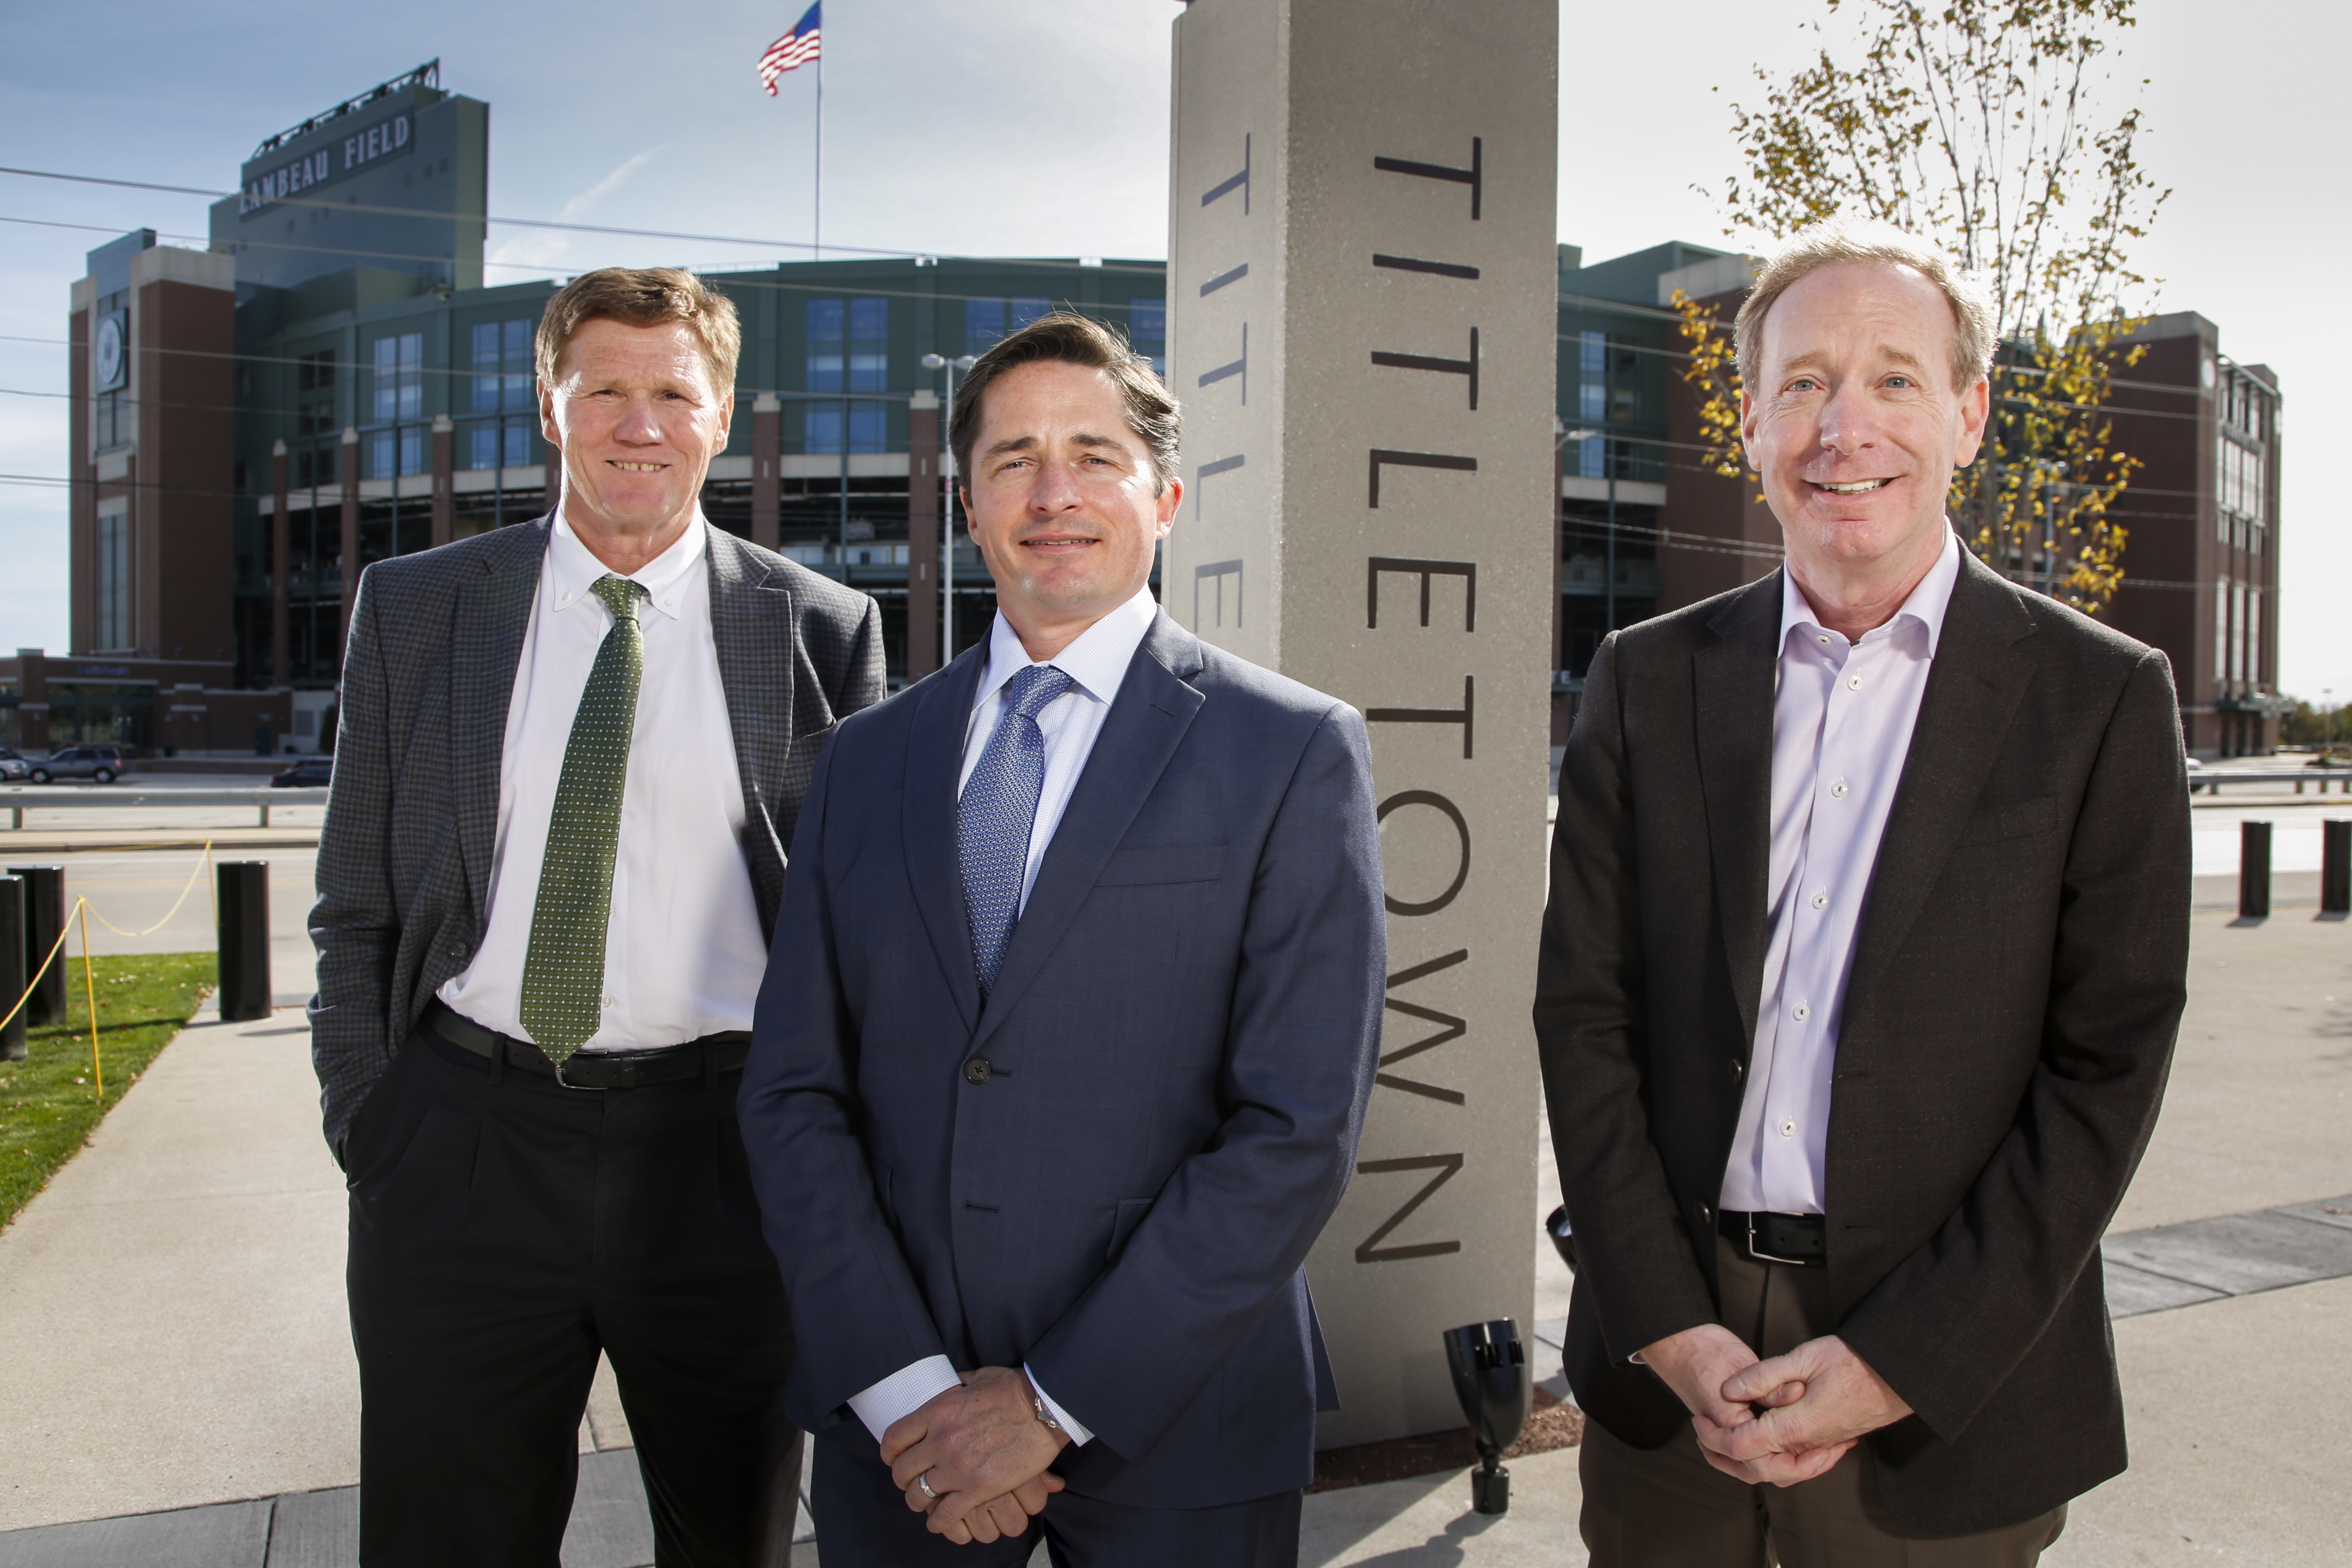 Mark Murphy, president & CEO, Green Bay Packers; Ed Policy, vice president & general counsel, Green Bay Packers; and Brad Smith, president, Microsoft, [pictured left-to-right] in Green Bay’s Titletown District, adjacent Lambeau Field, to announce TitletownTech